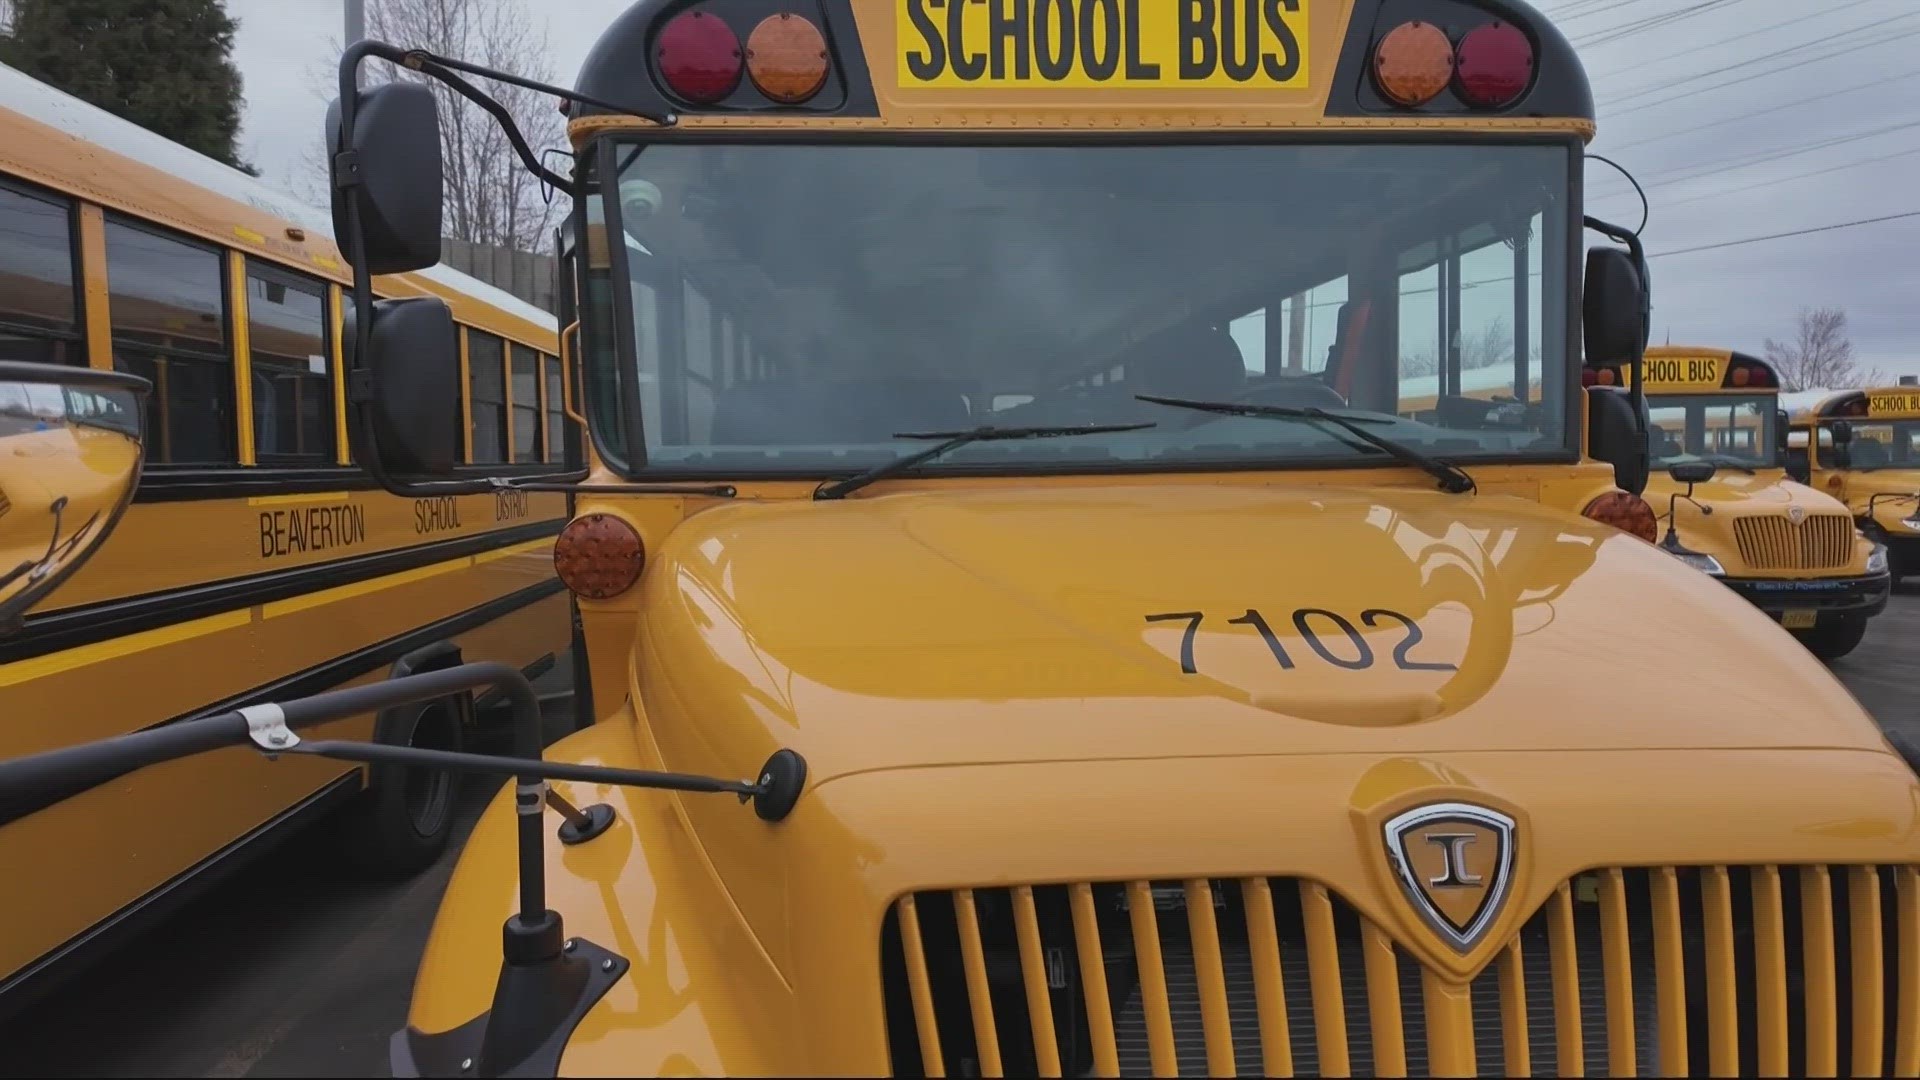 The Beaverton School District is a leader in electric school buses in Oregon. A PGE grant helps districts cover upfront costs in going electric.